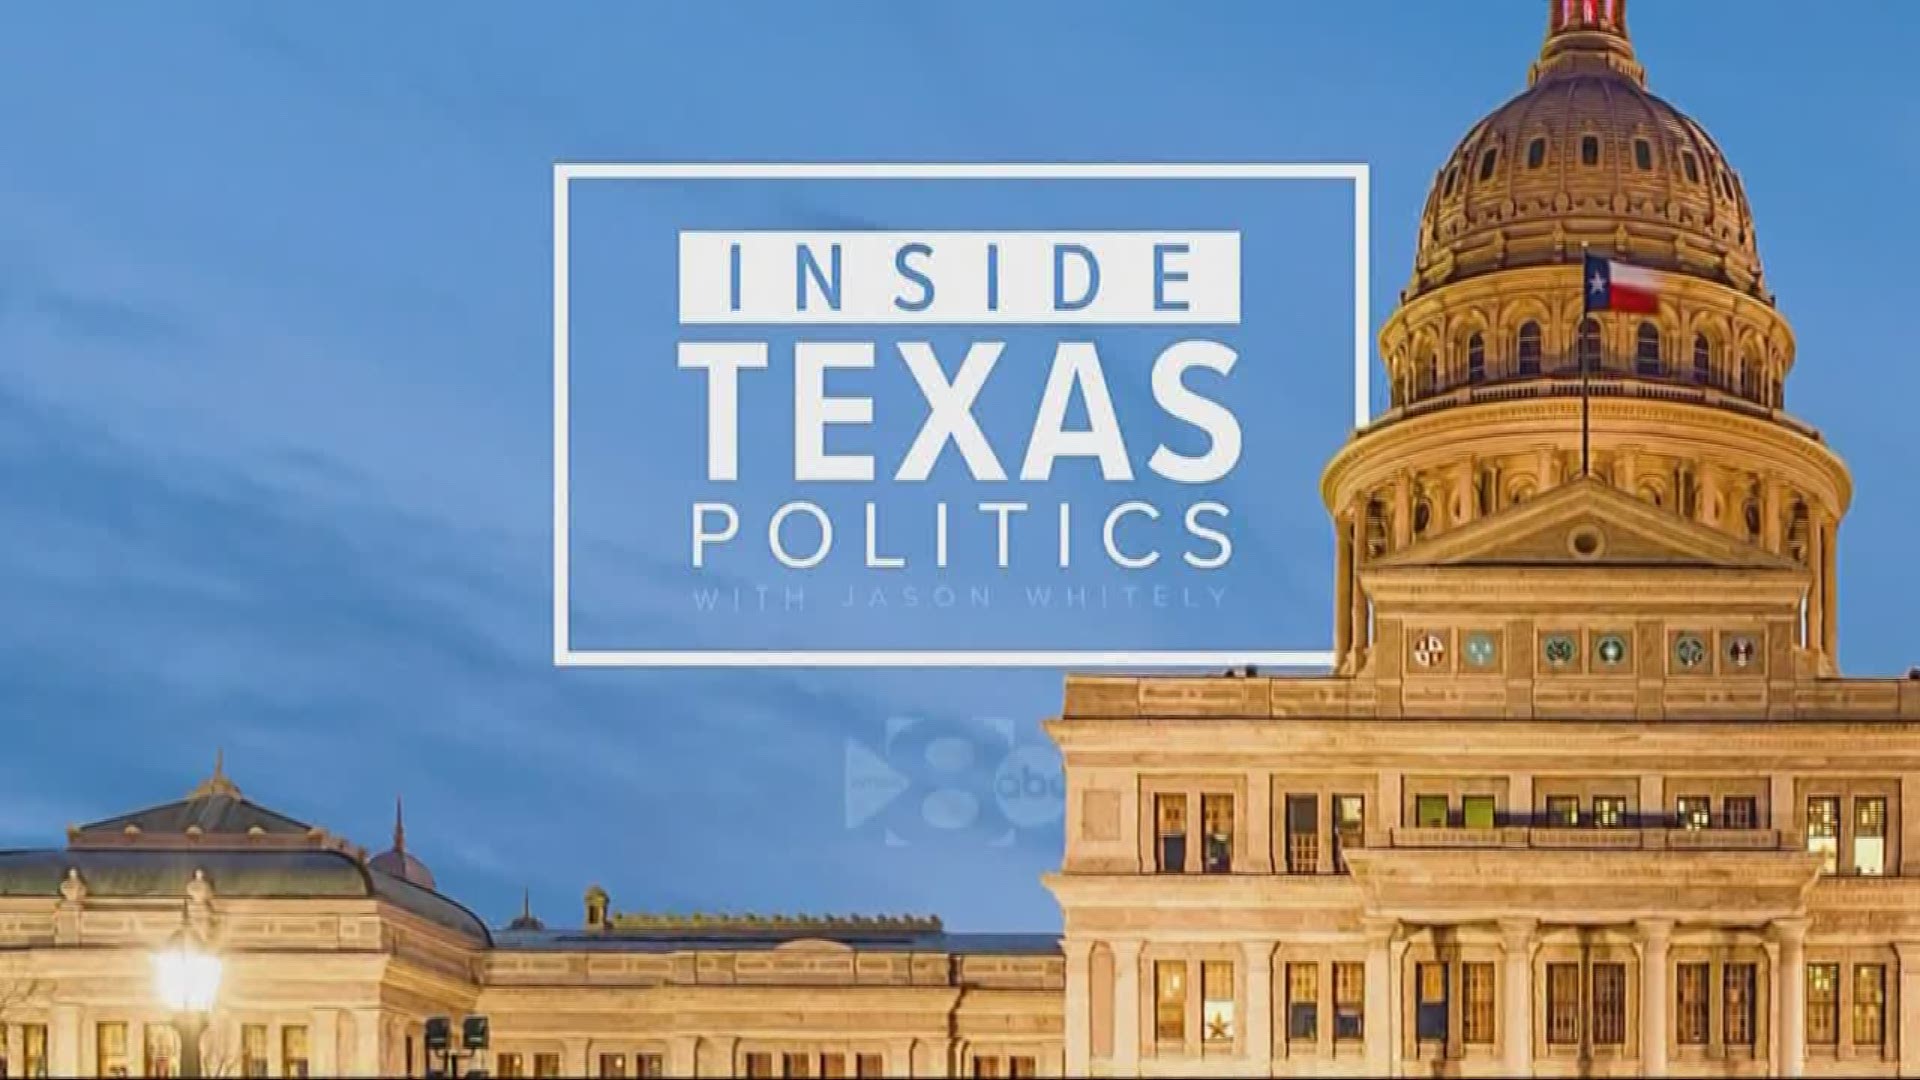 Here's a look at what's happening politically across Texas.